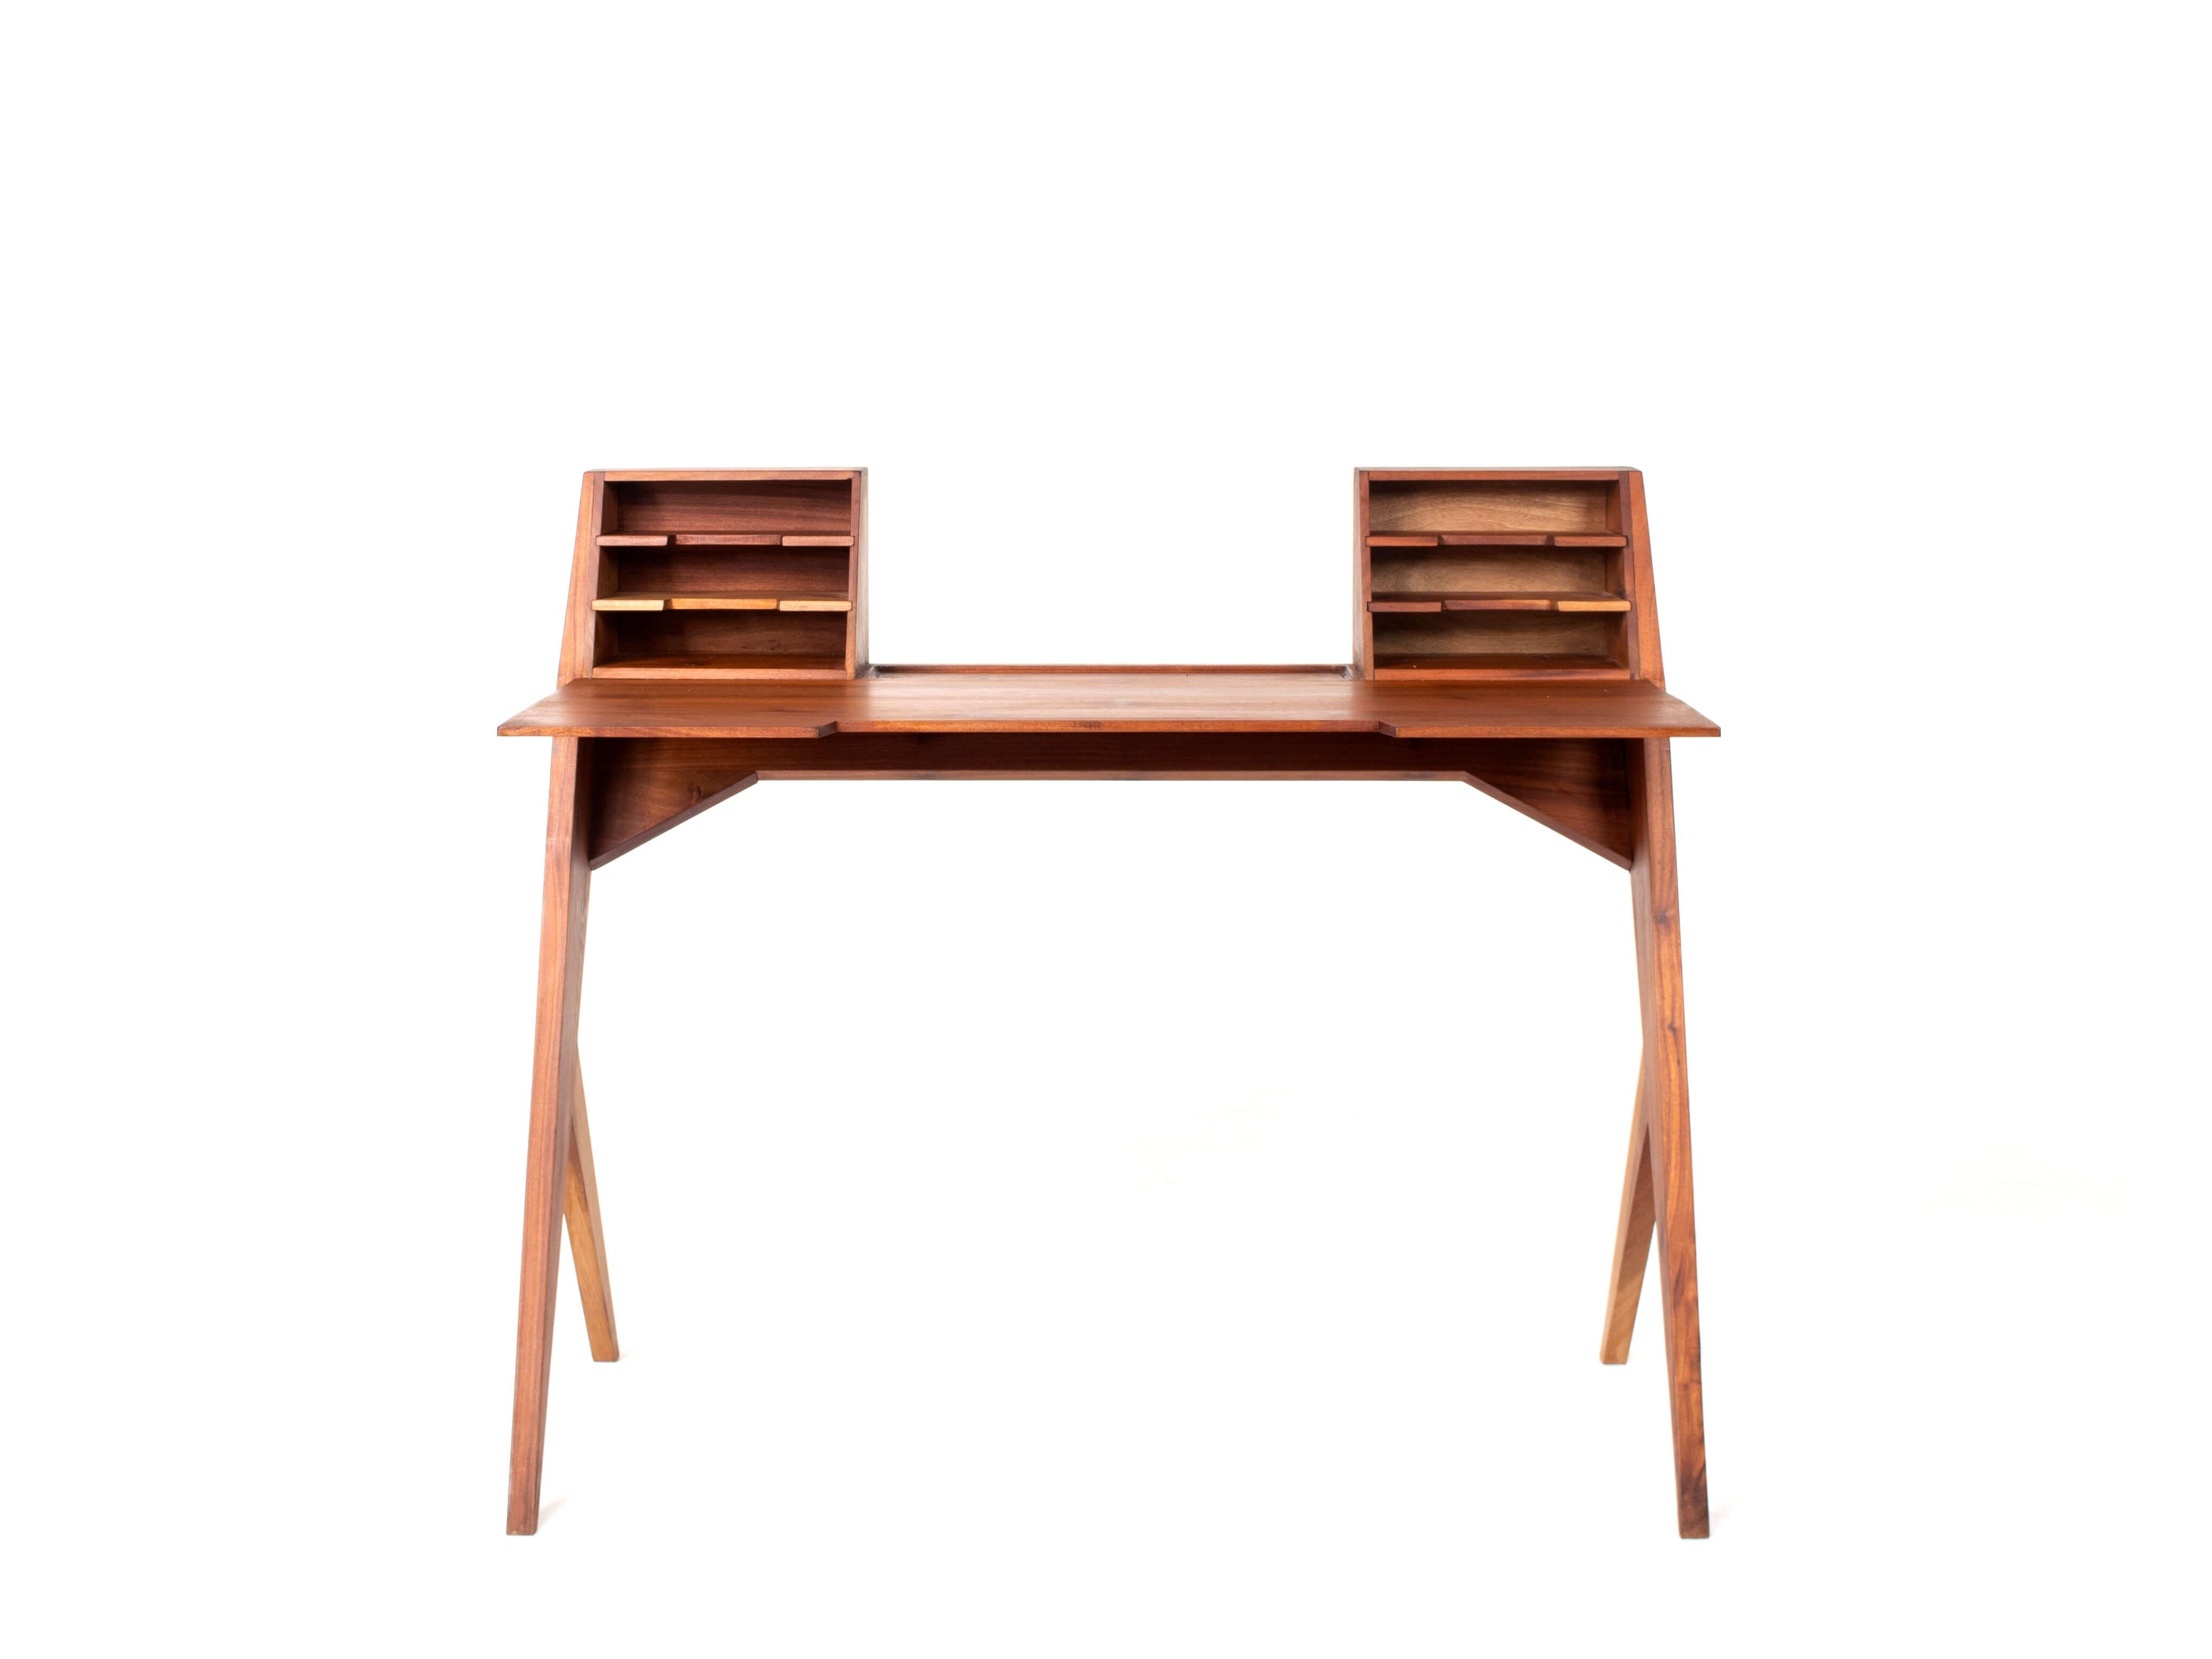 Handcrafted teak desk made in Italy with a stunning design. We were able to get this from an old factory in southern Italy. The design is timeless and the desk will quickly become a conversation piece. Especially the legs are elegant and